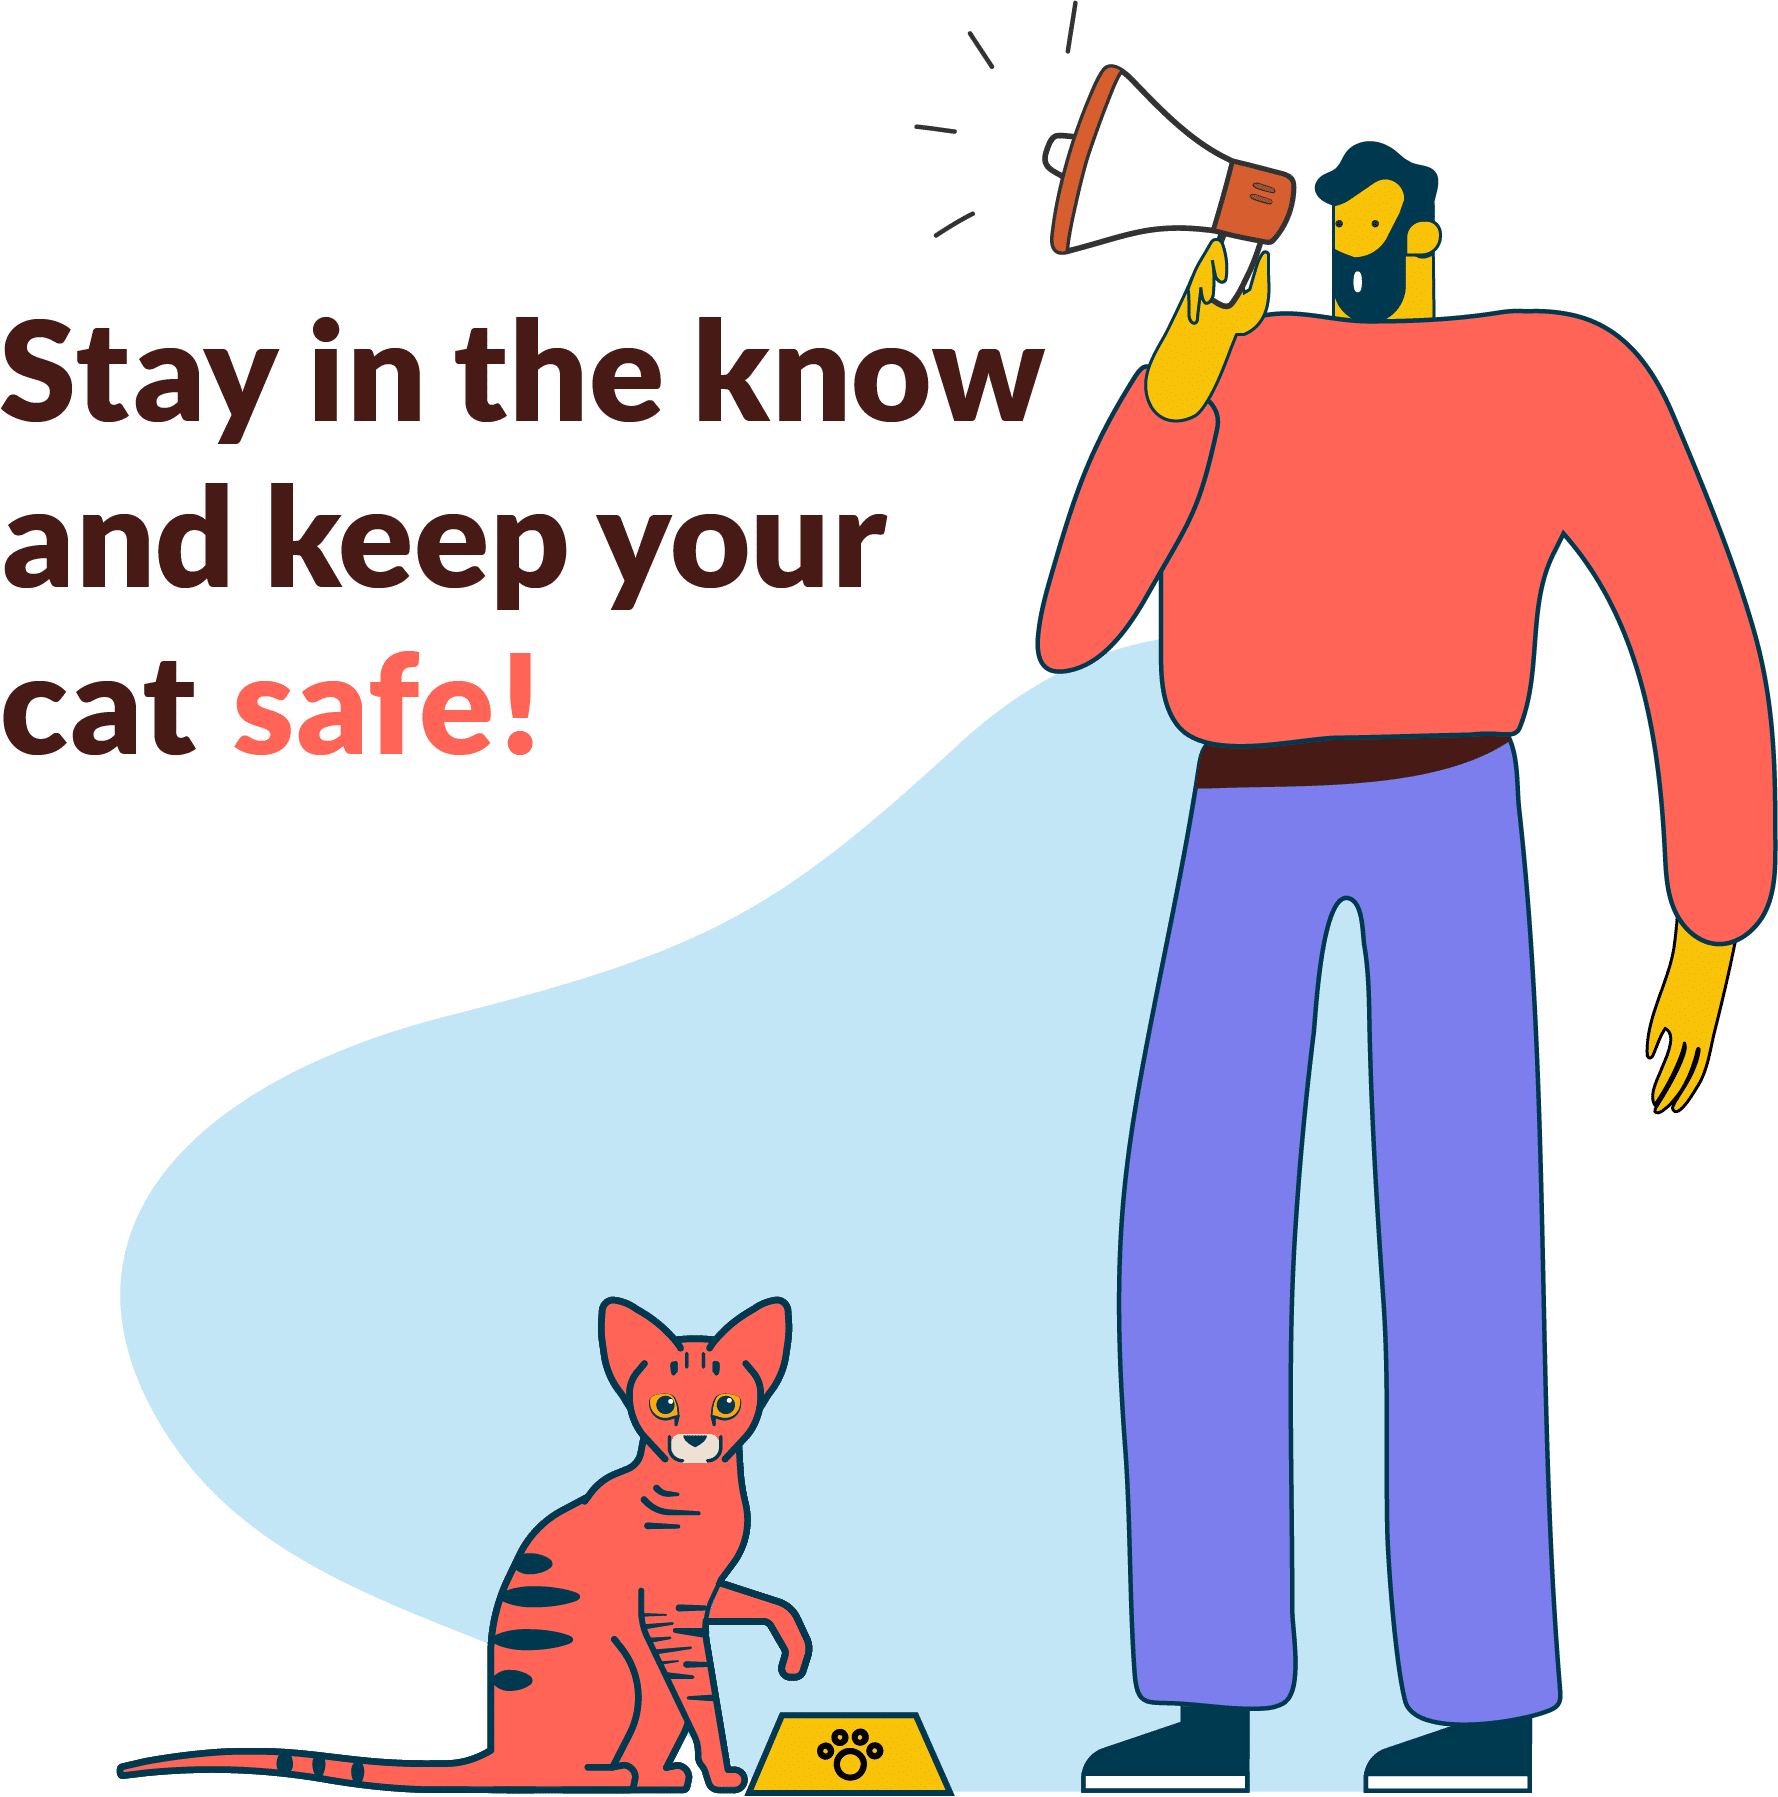 Stay in the know and keep your cat safe!